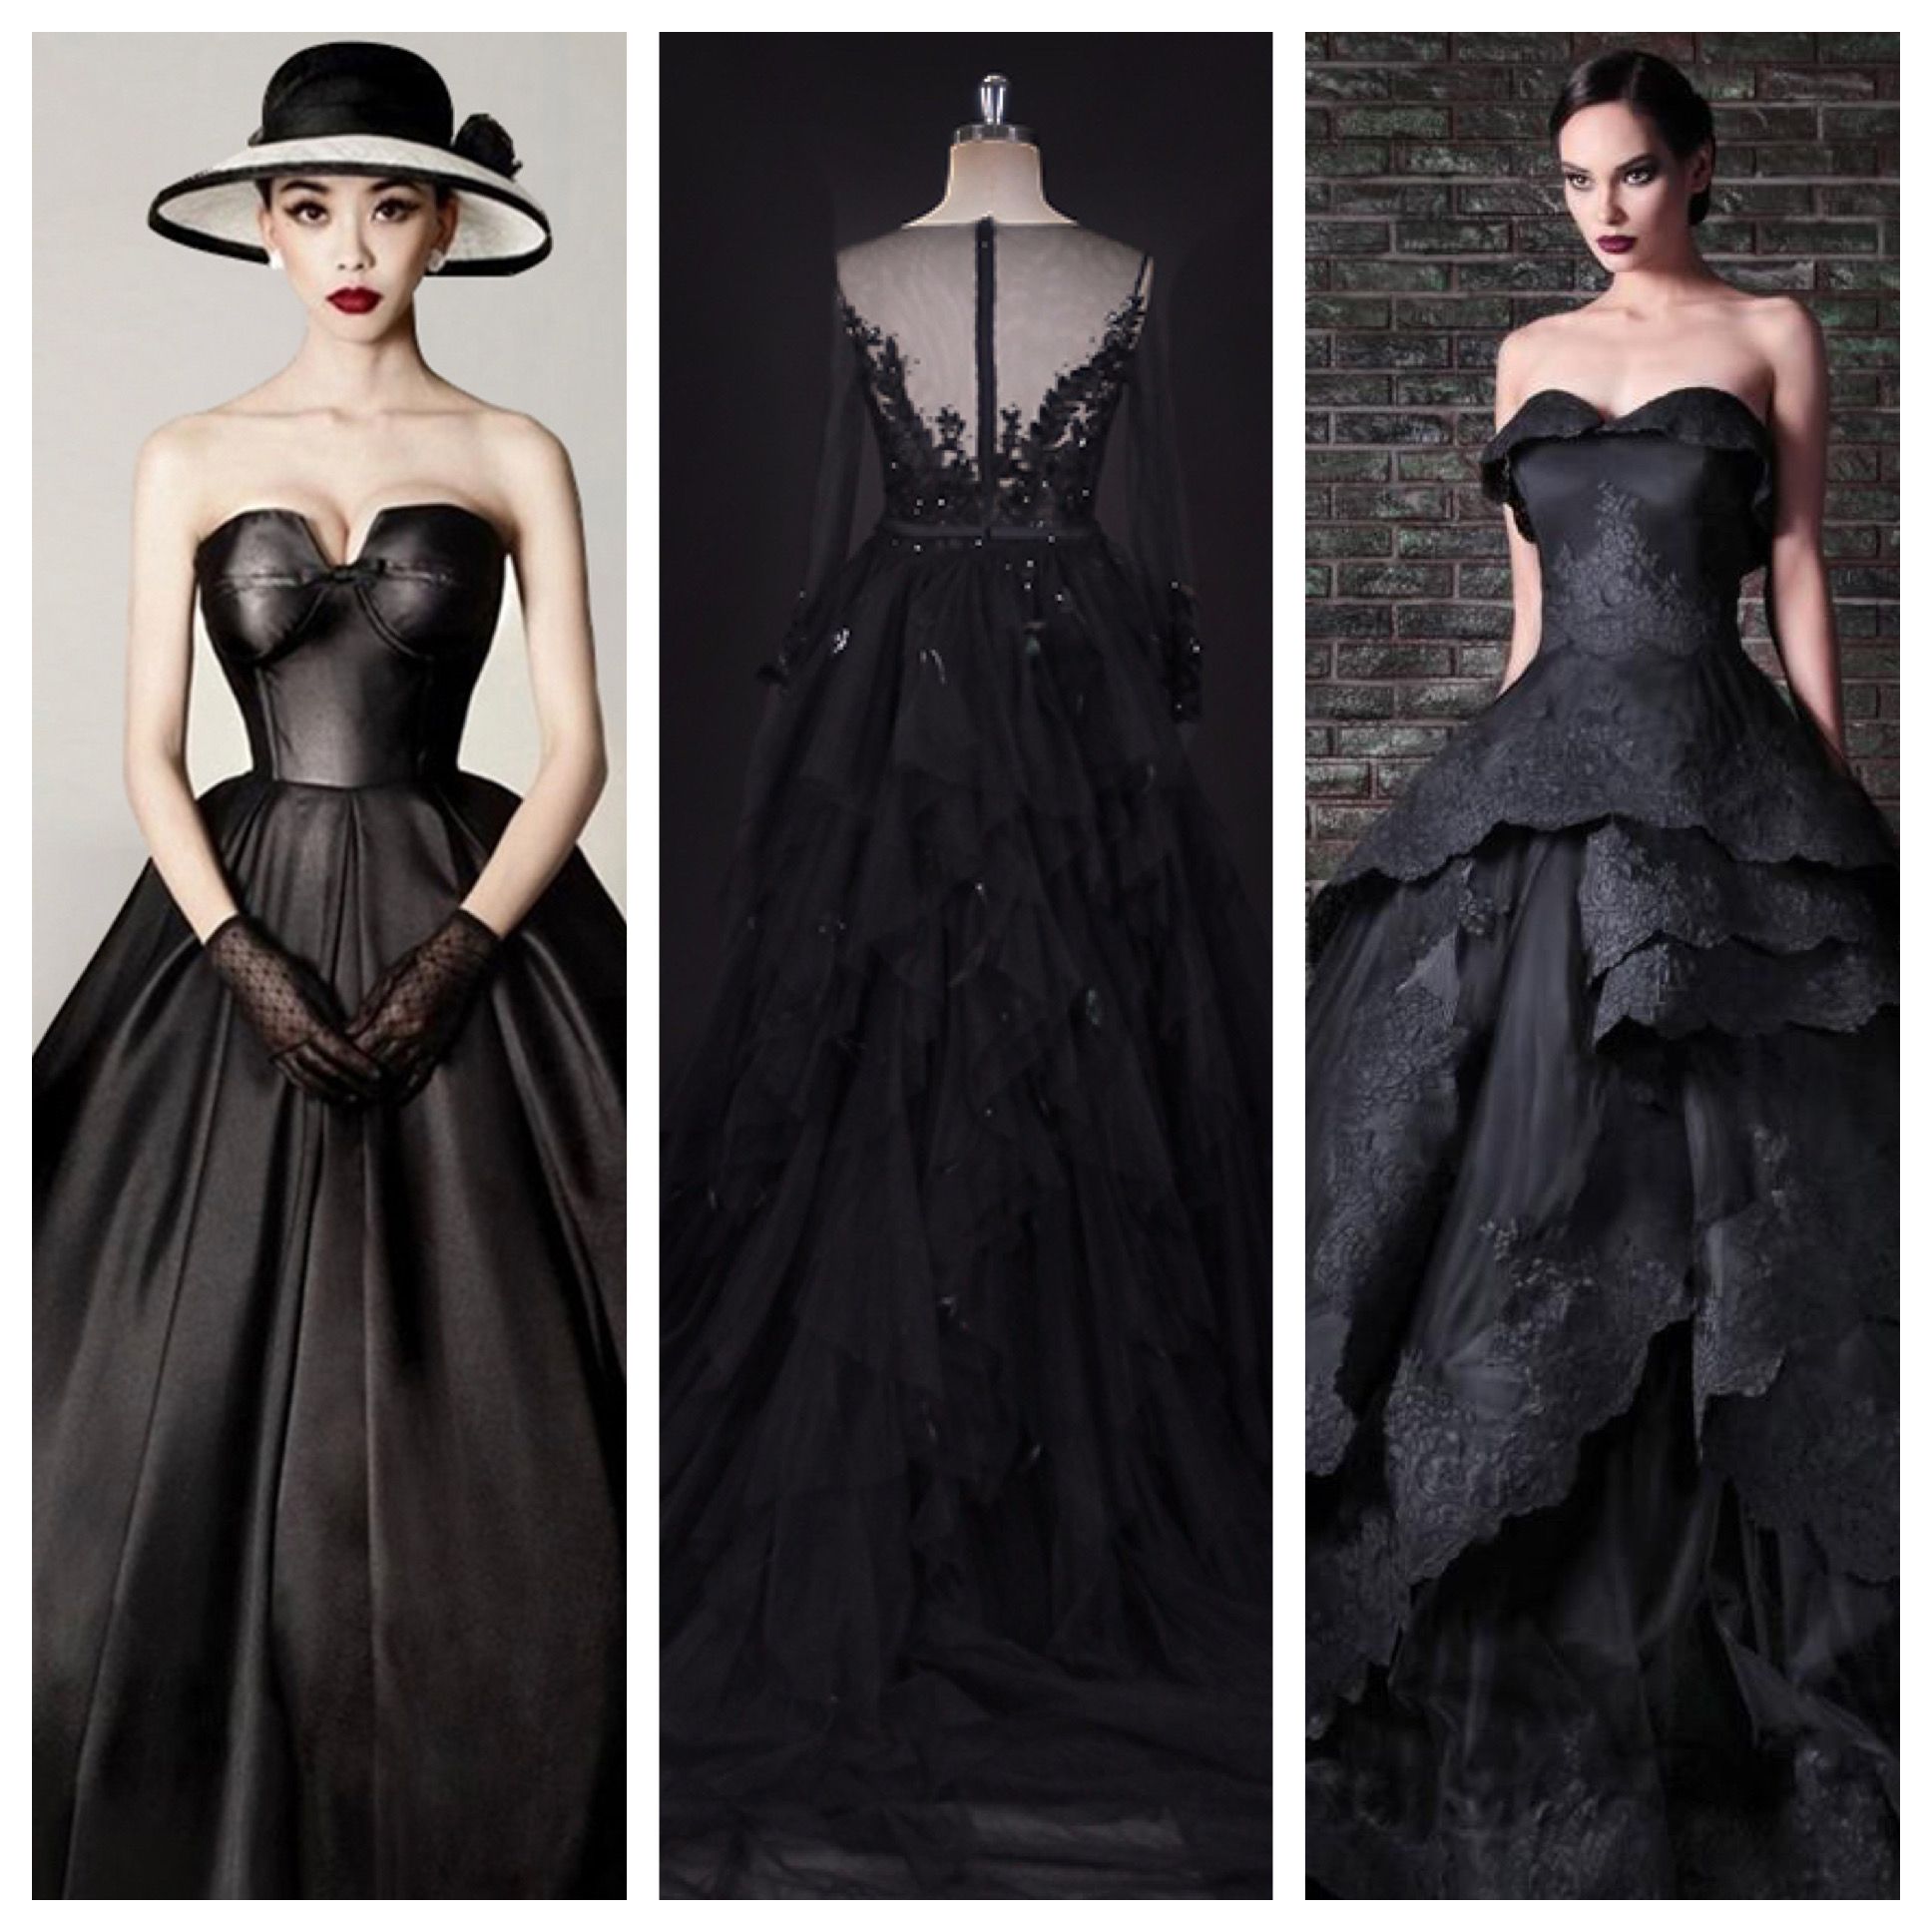 Over the past century, “Little Black Dress” has become the